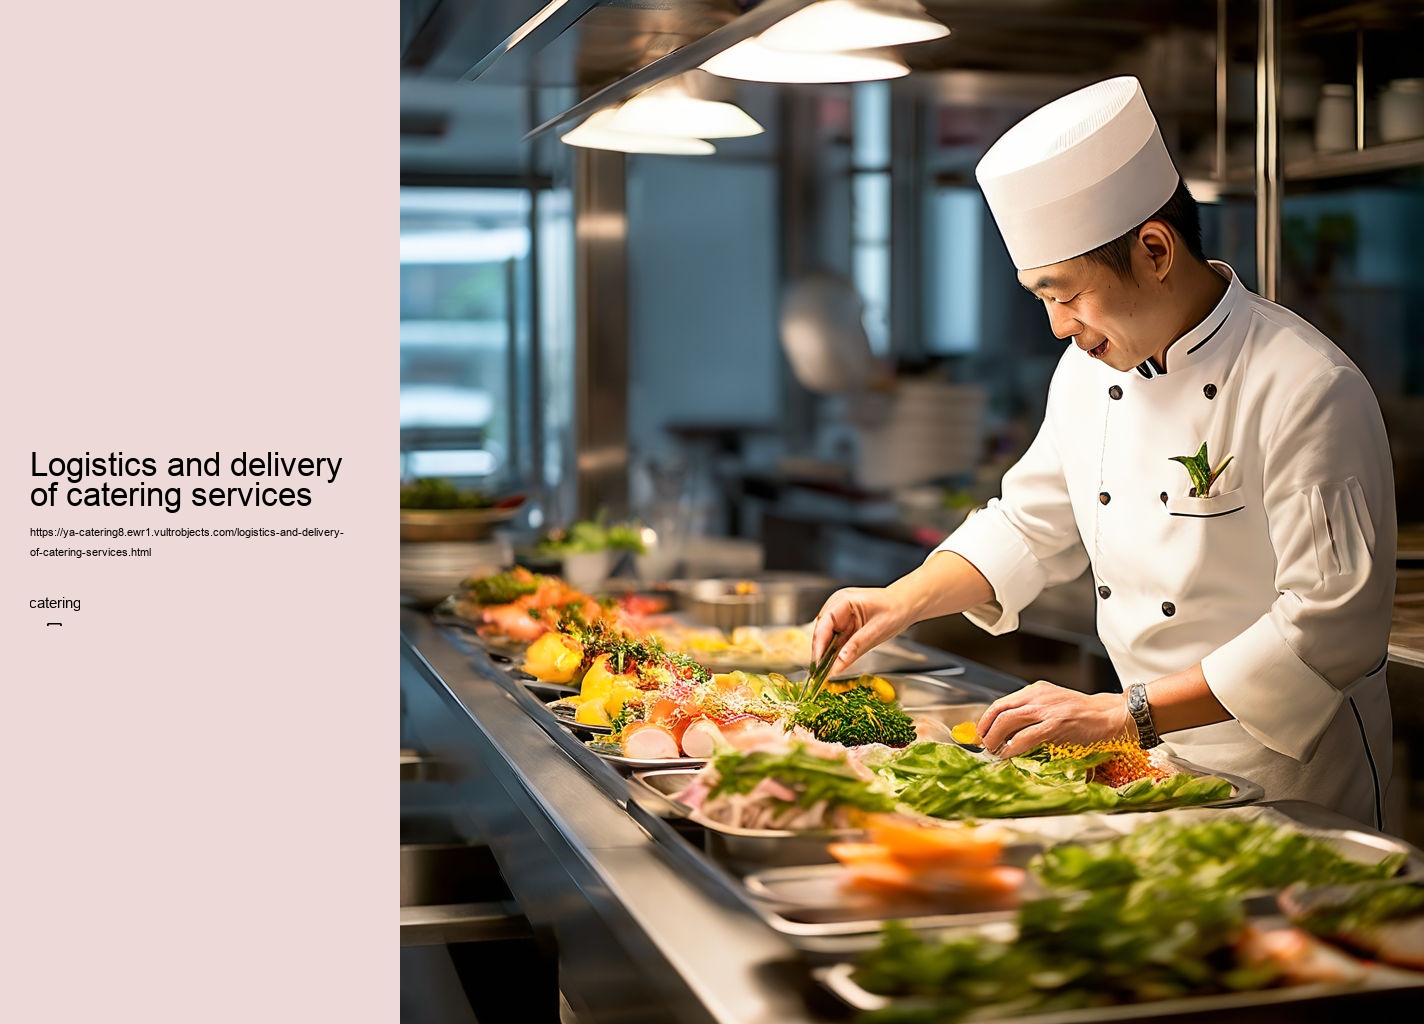 Logistics and delivery of catering services